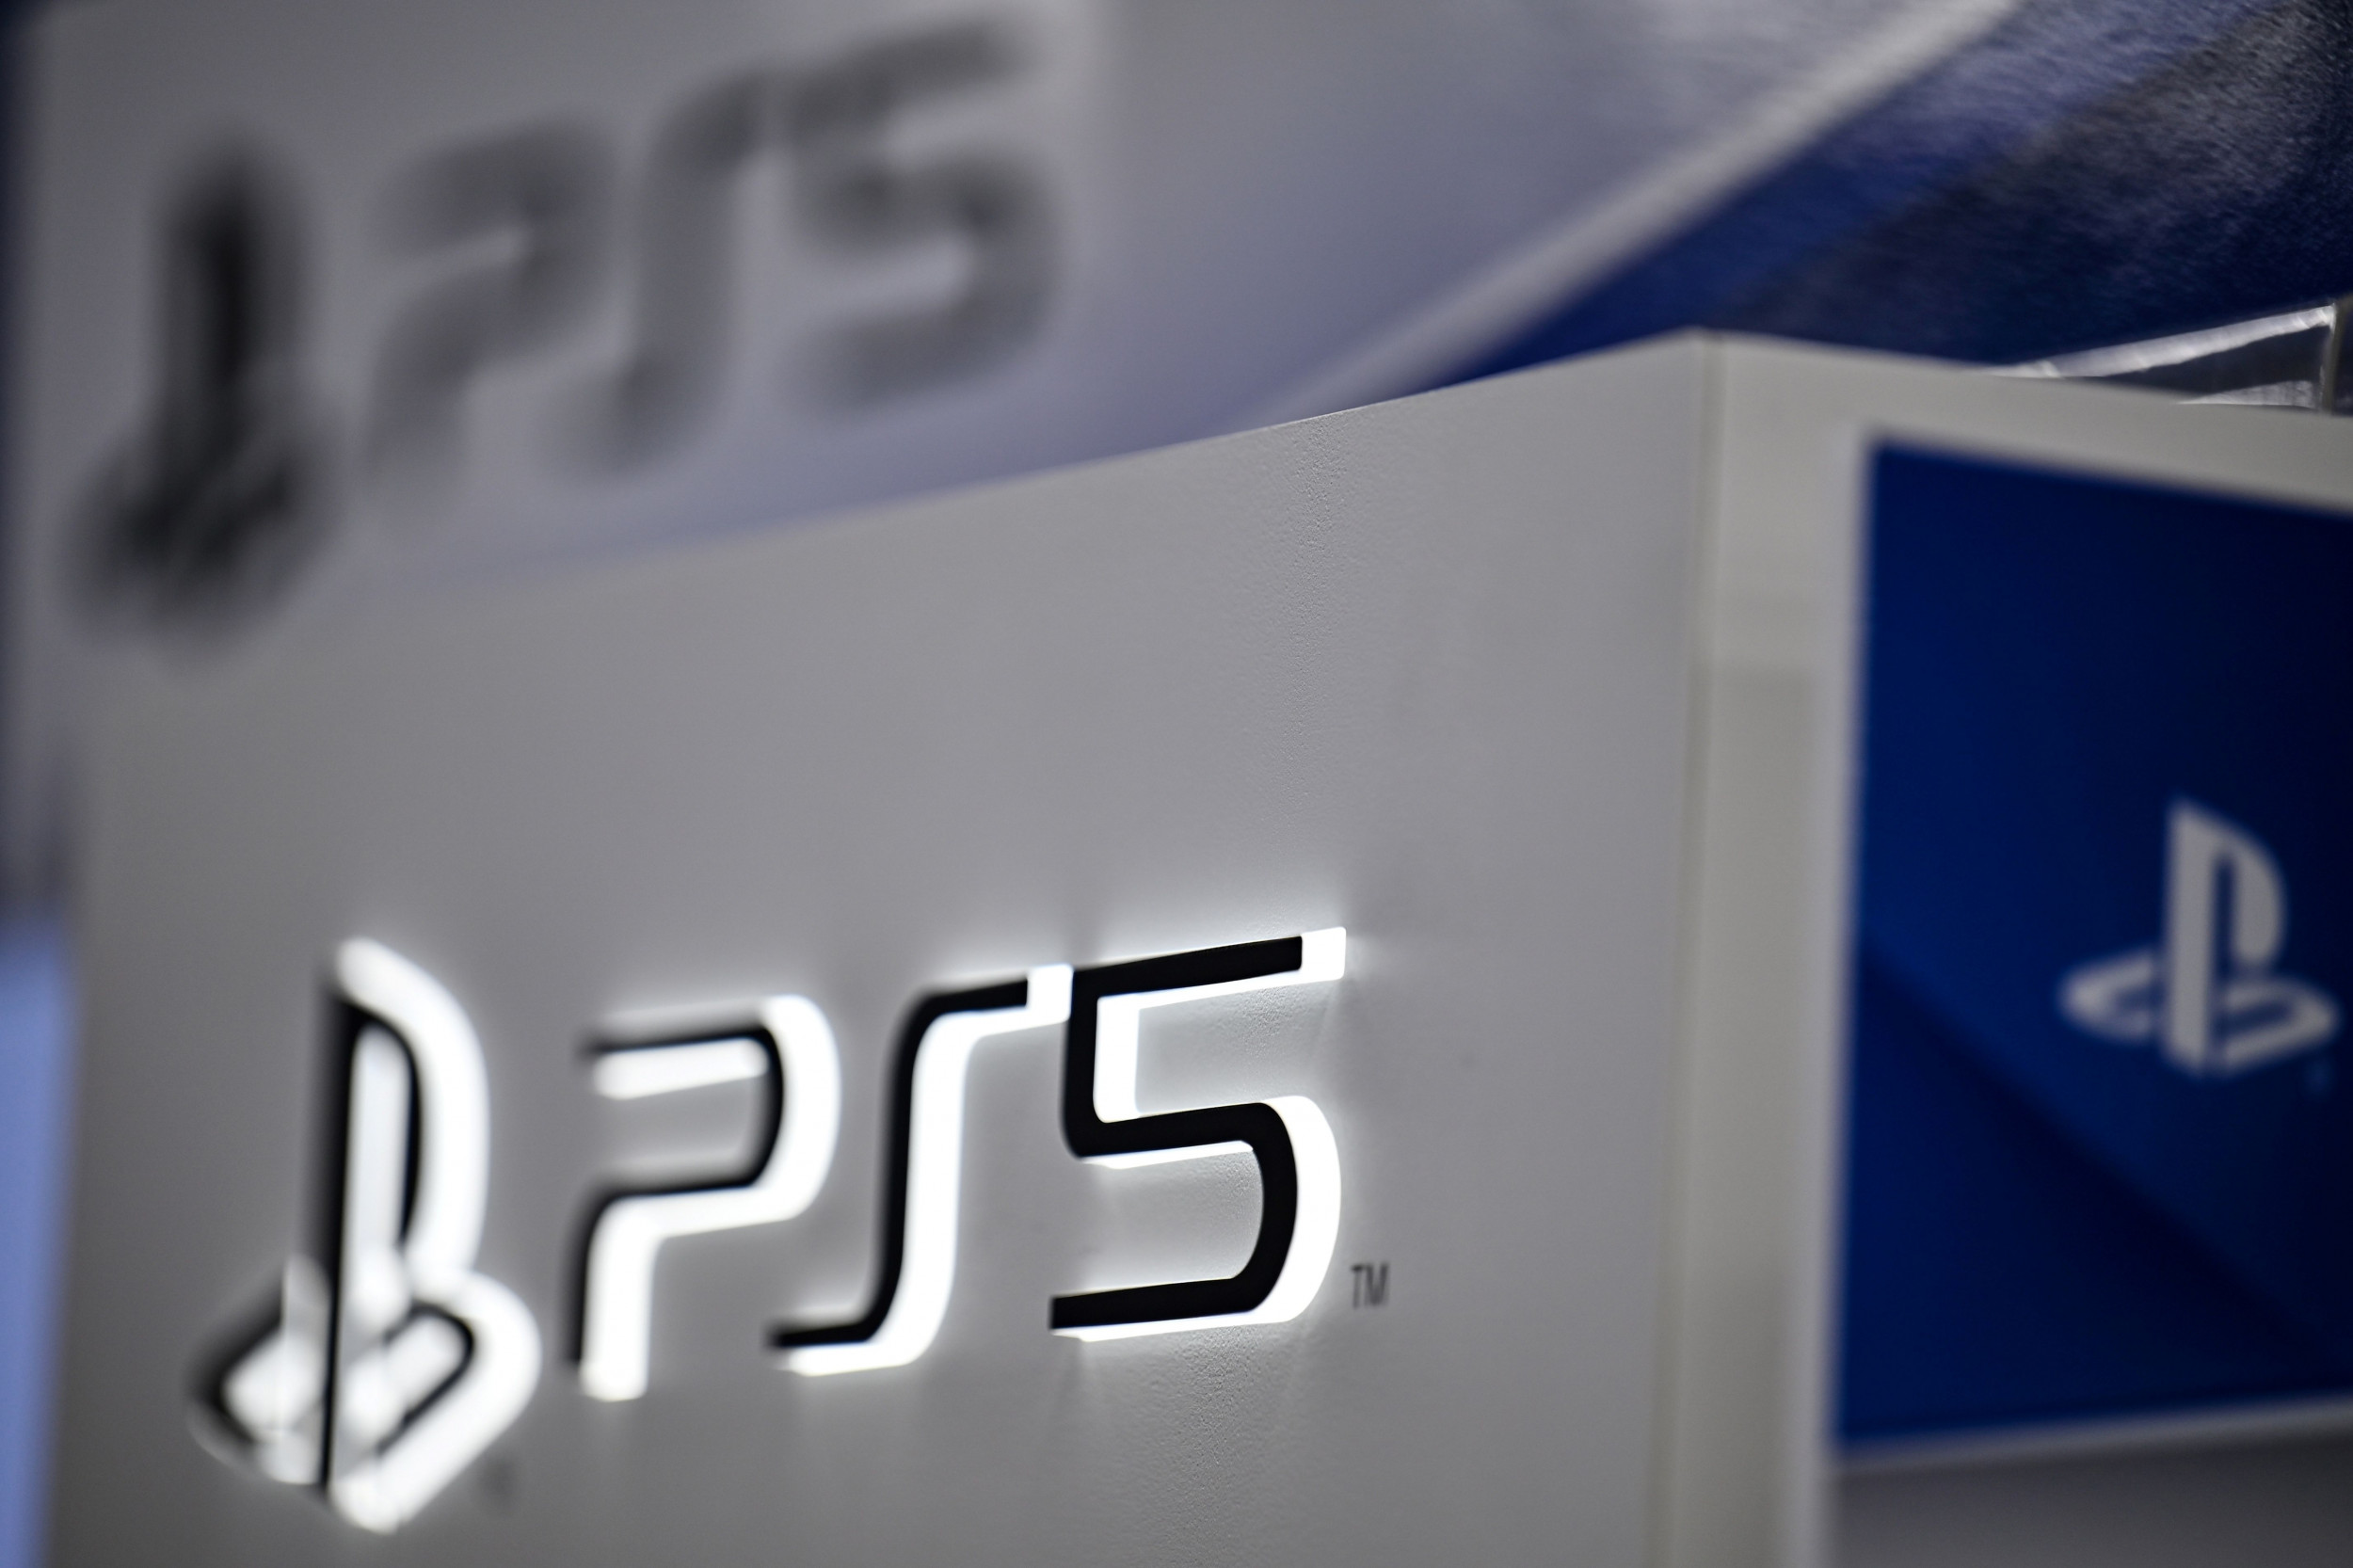 PS5 refueling updates for PlayStation Direct, GameStop, Target, Newegg and more